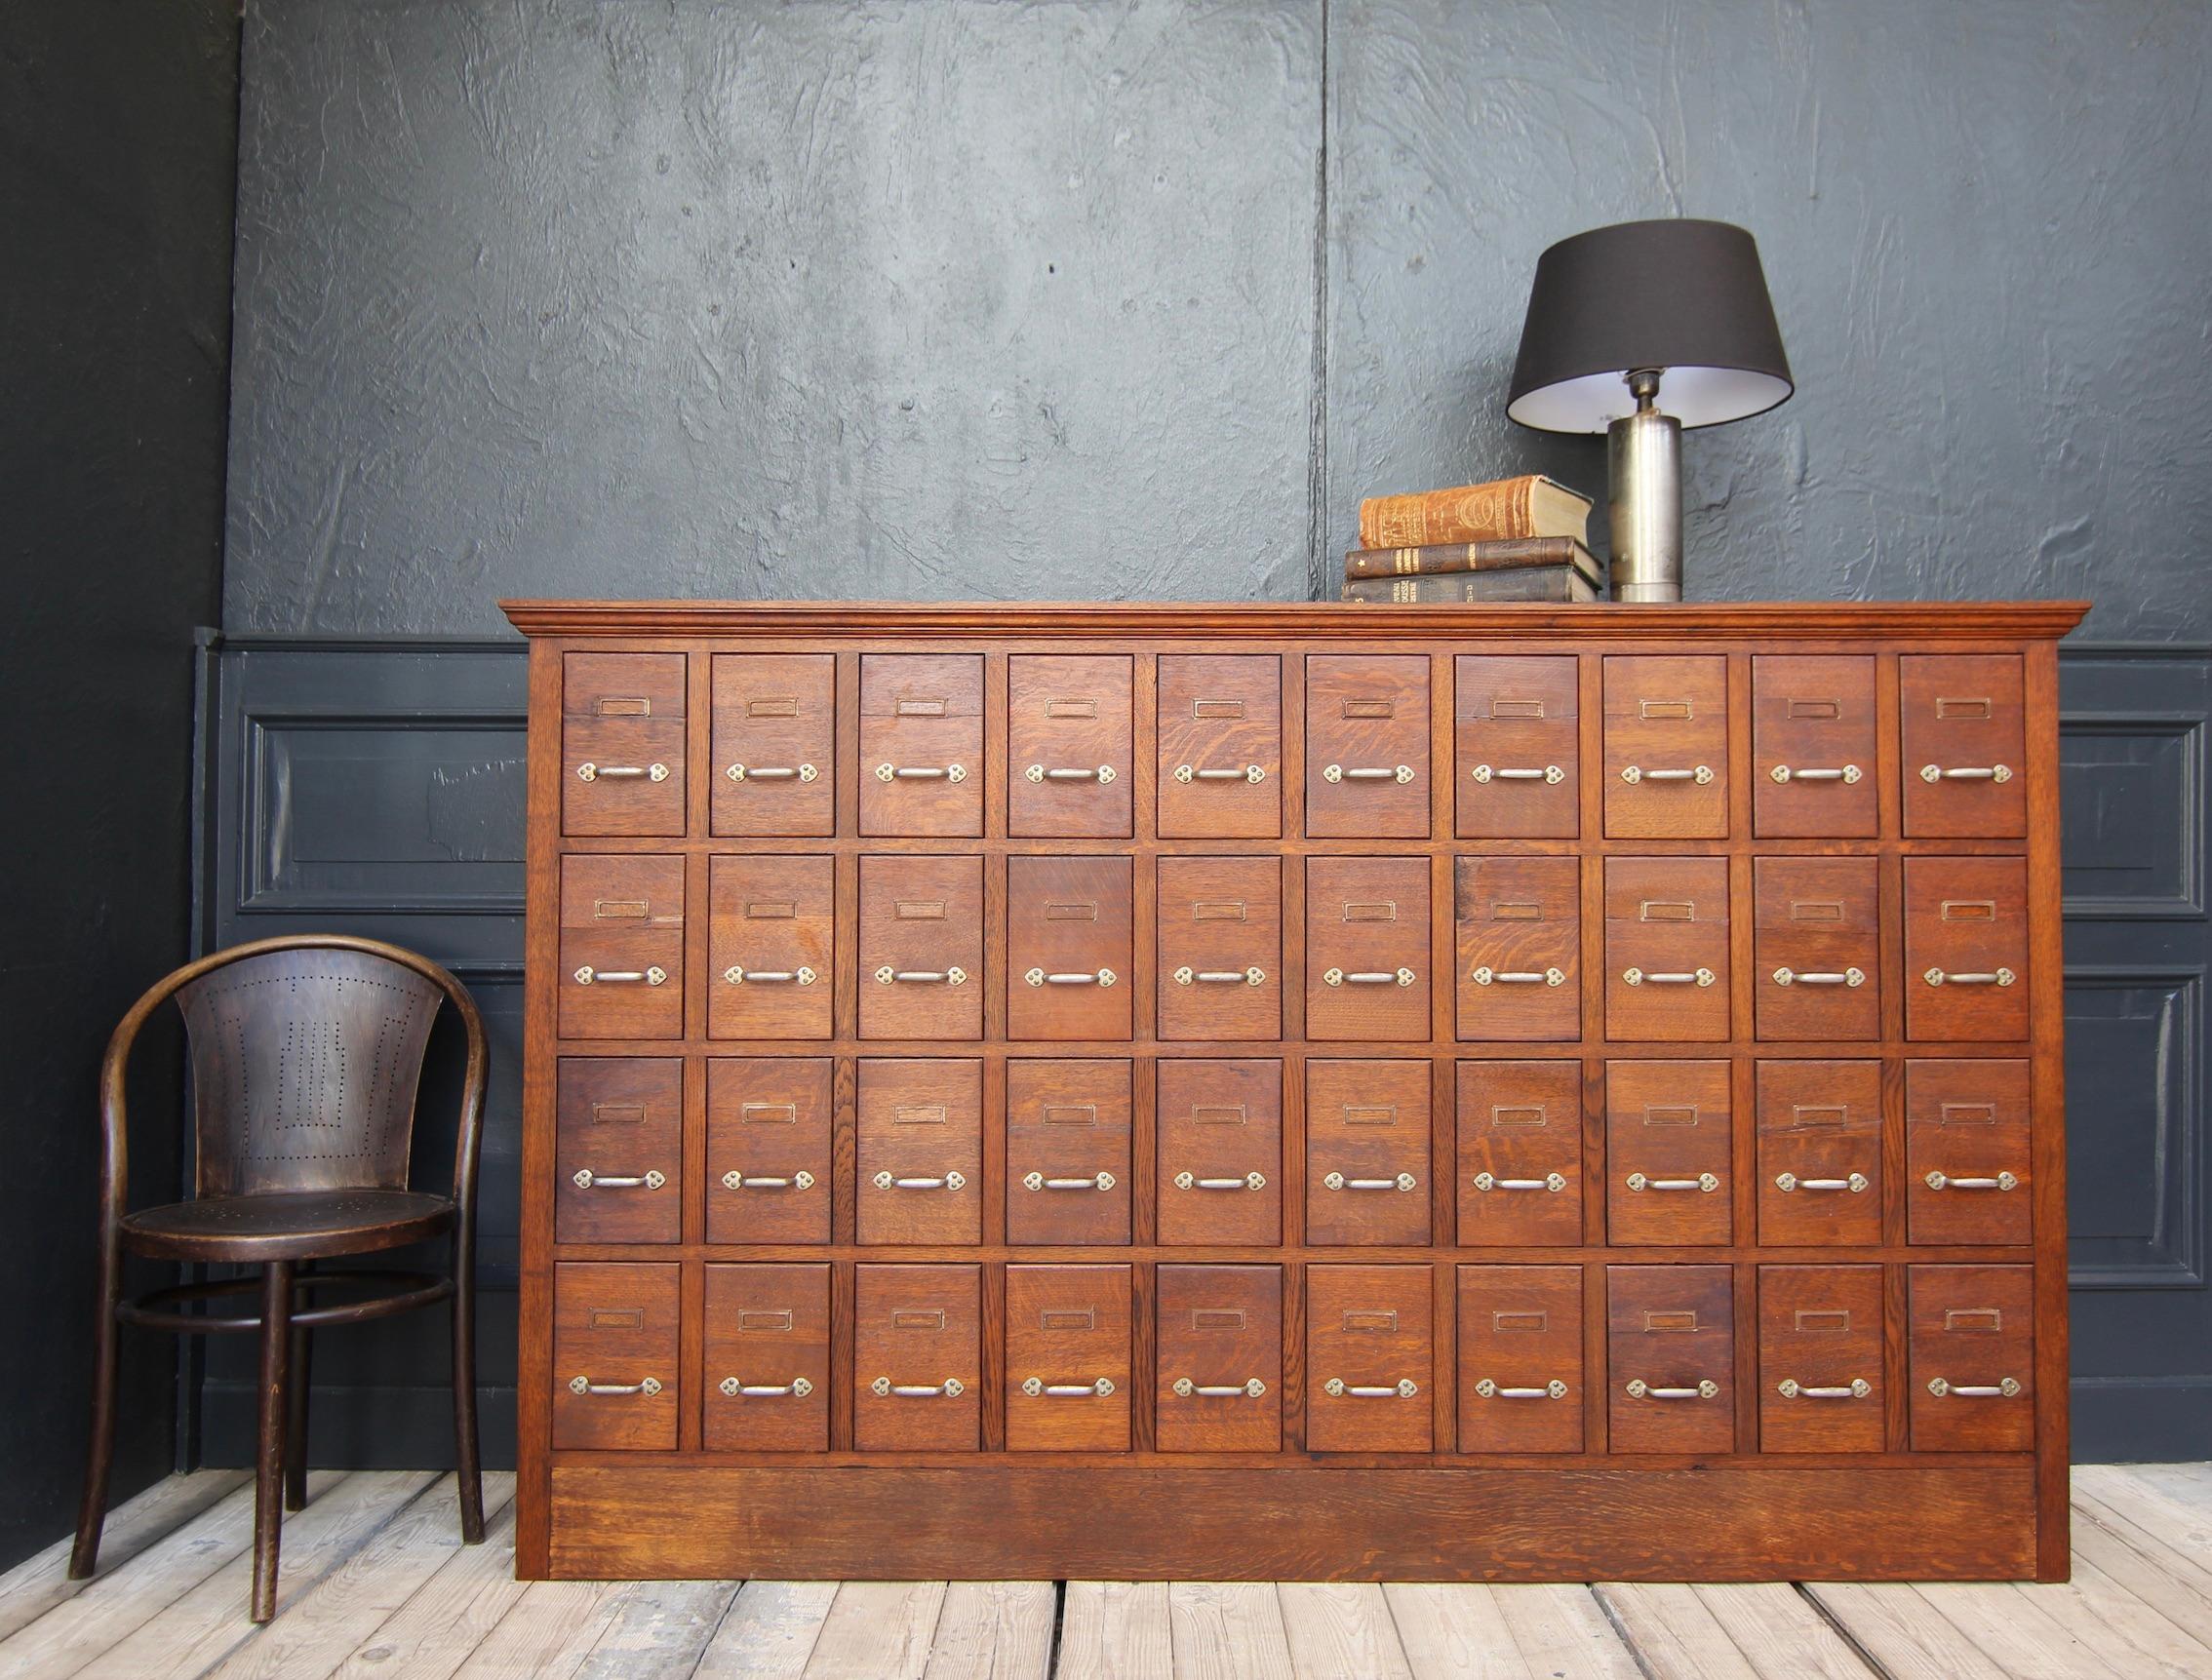 A vintage apothecary cabinet from the 1st half of the 20th century. 

Laterally coffered oak carcass with top plate and back wall of plywood. 40 drawers made of poplar wood with oak fronts. Original handles and label frames.

Dimensions: 
128 cm